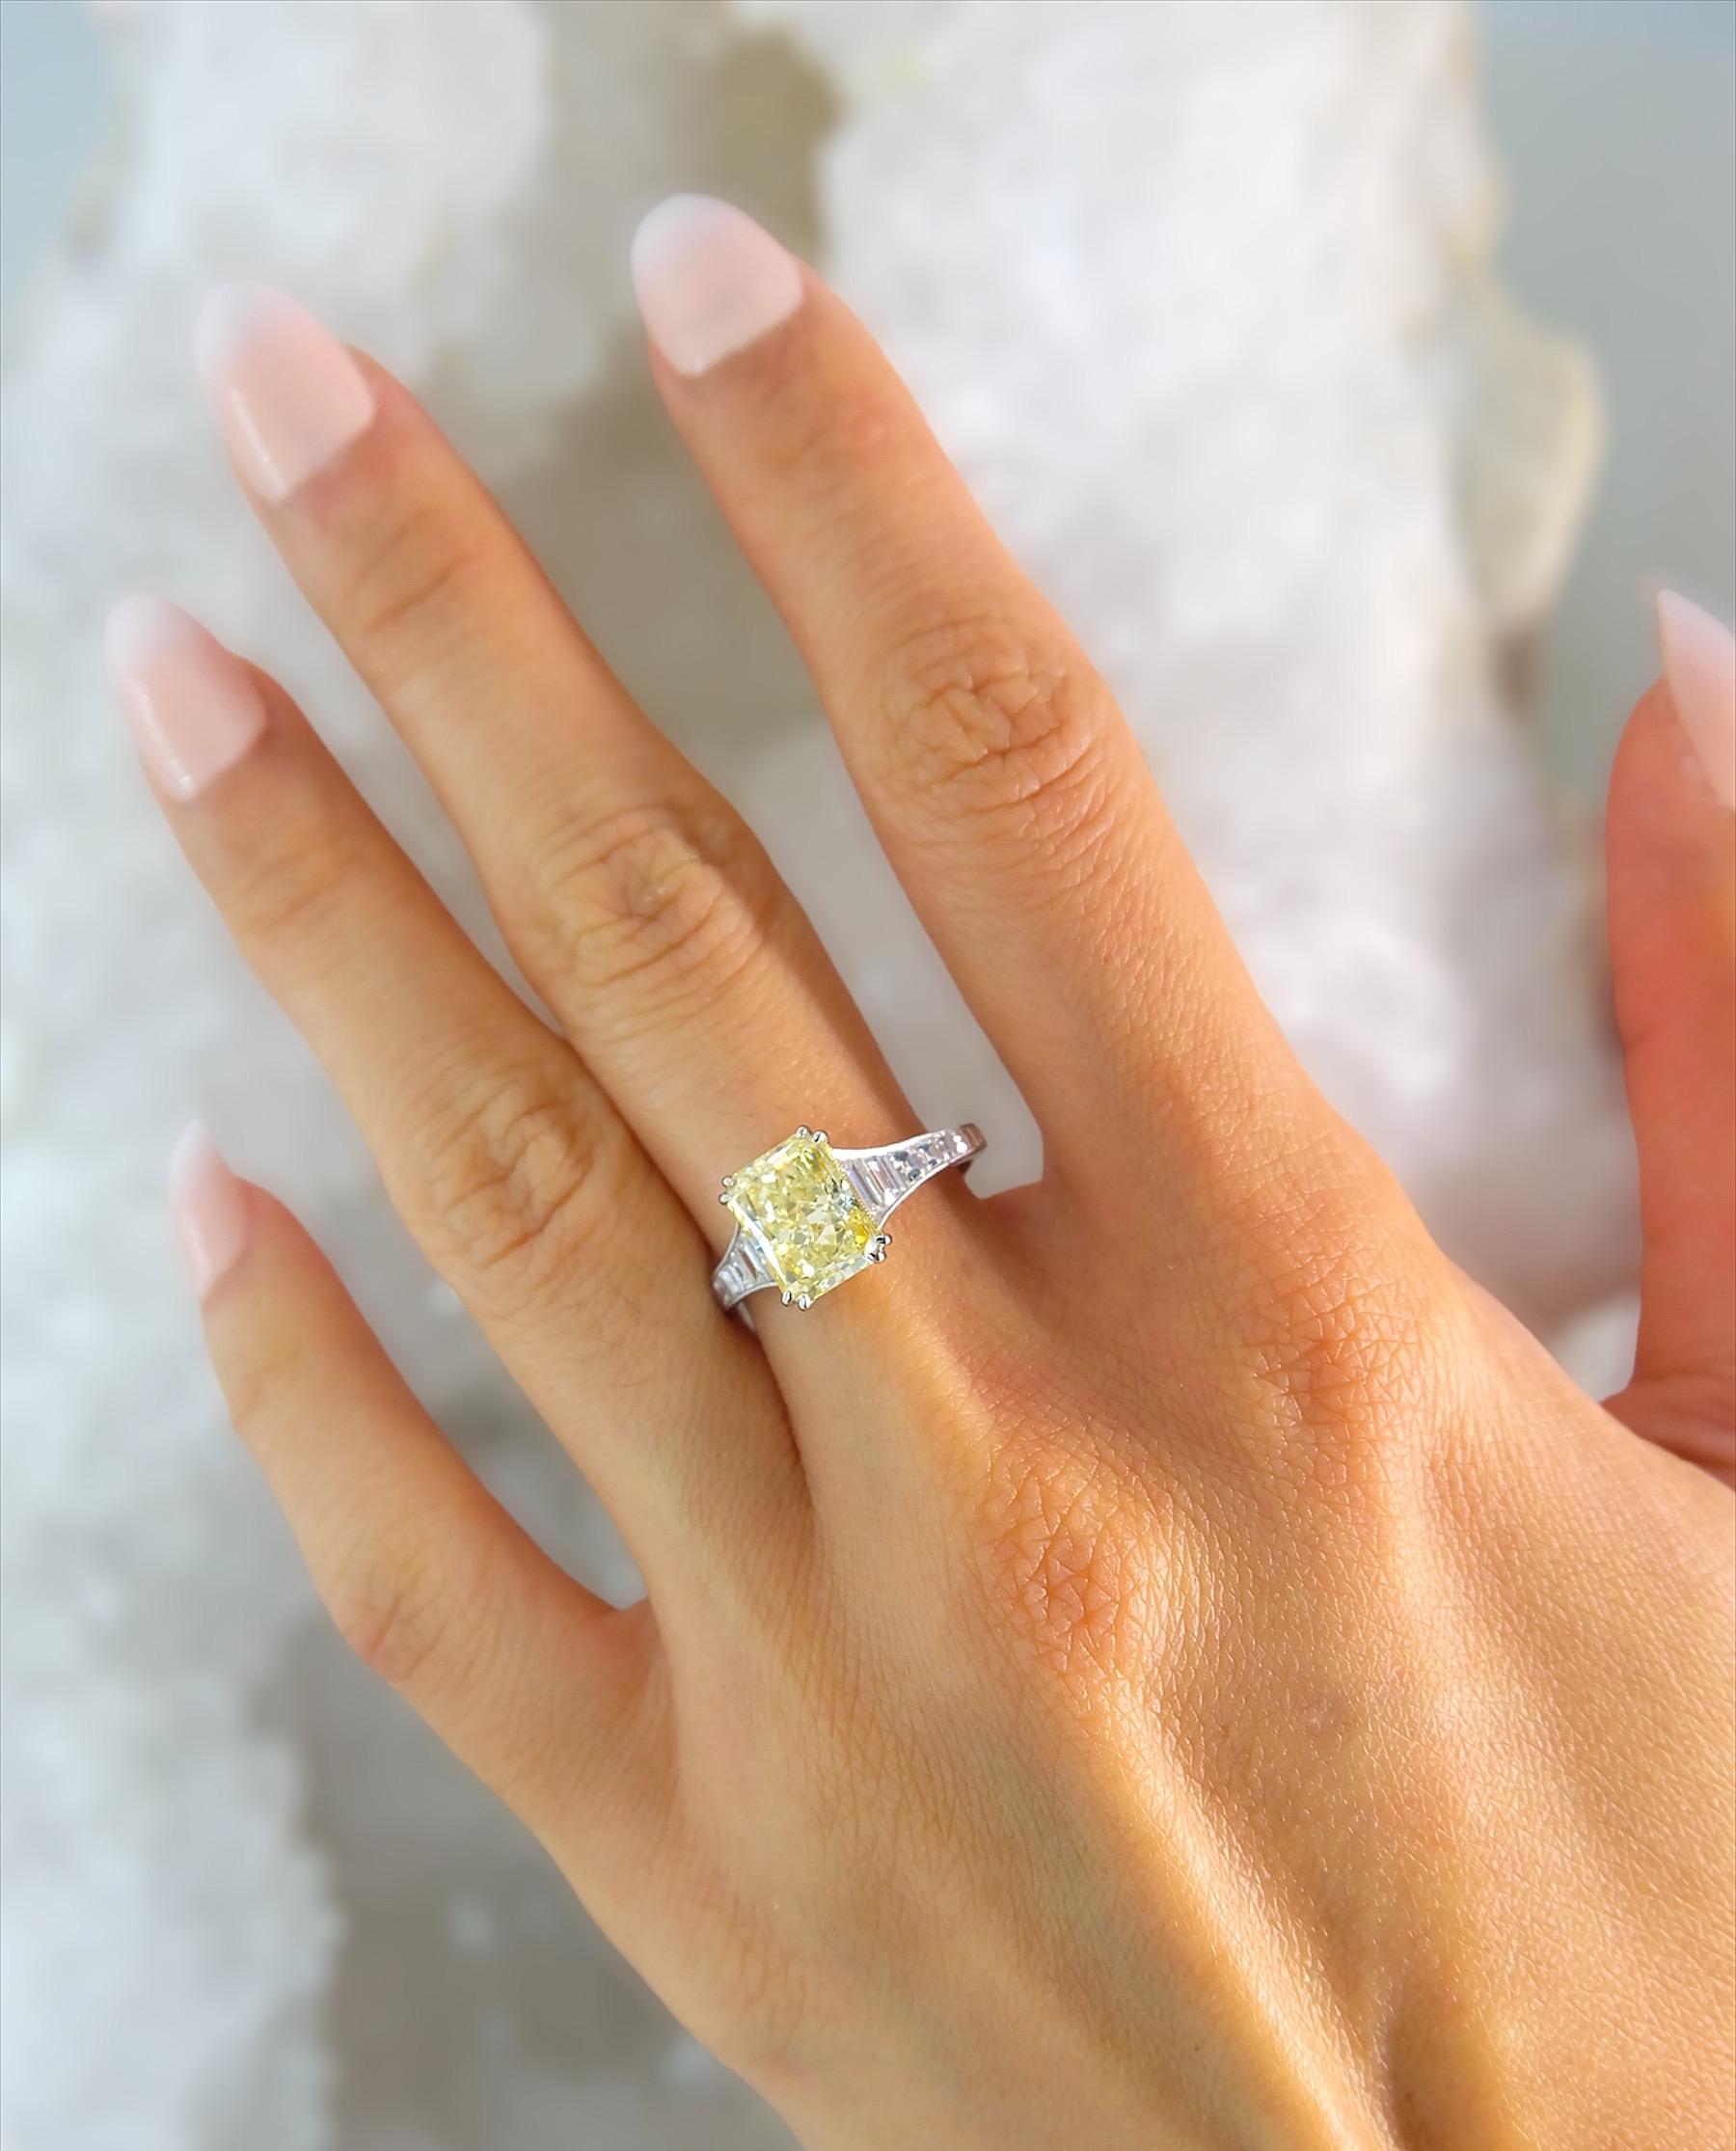 Sophia D. 2.50 Carat Fancy Light Yellow Diamond Ring Set in Platinum In New Condition For Sale In New York, NY